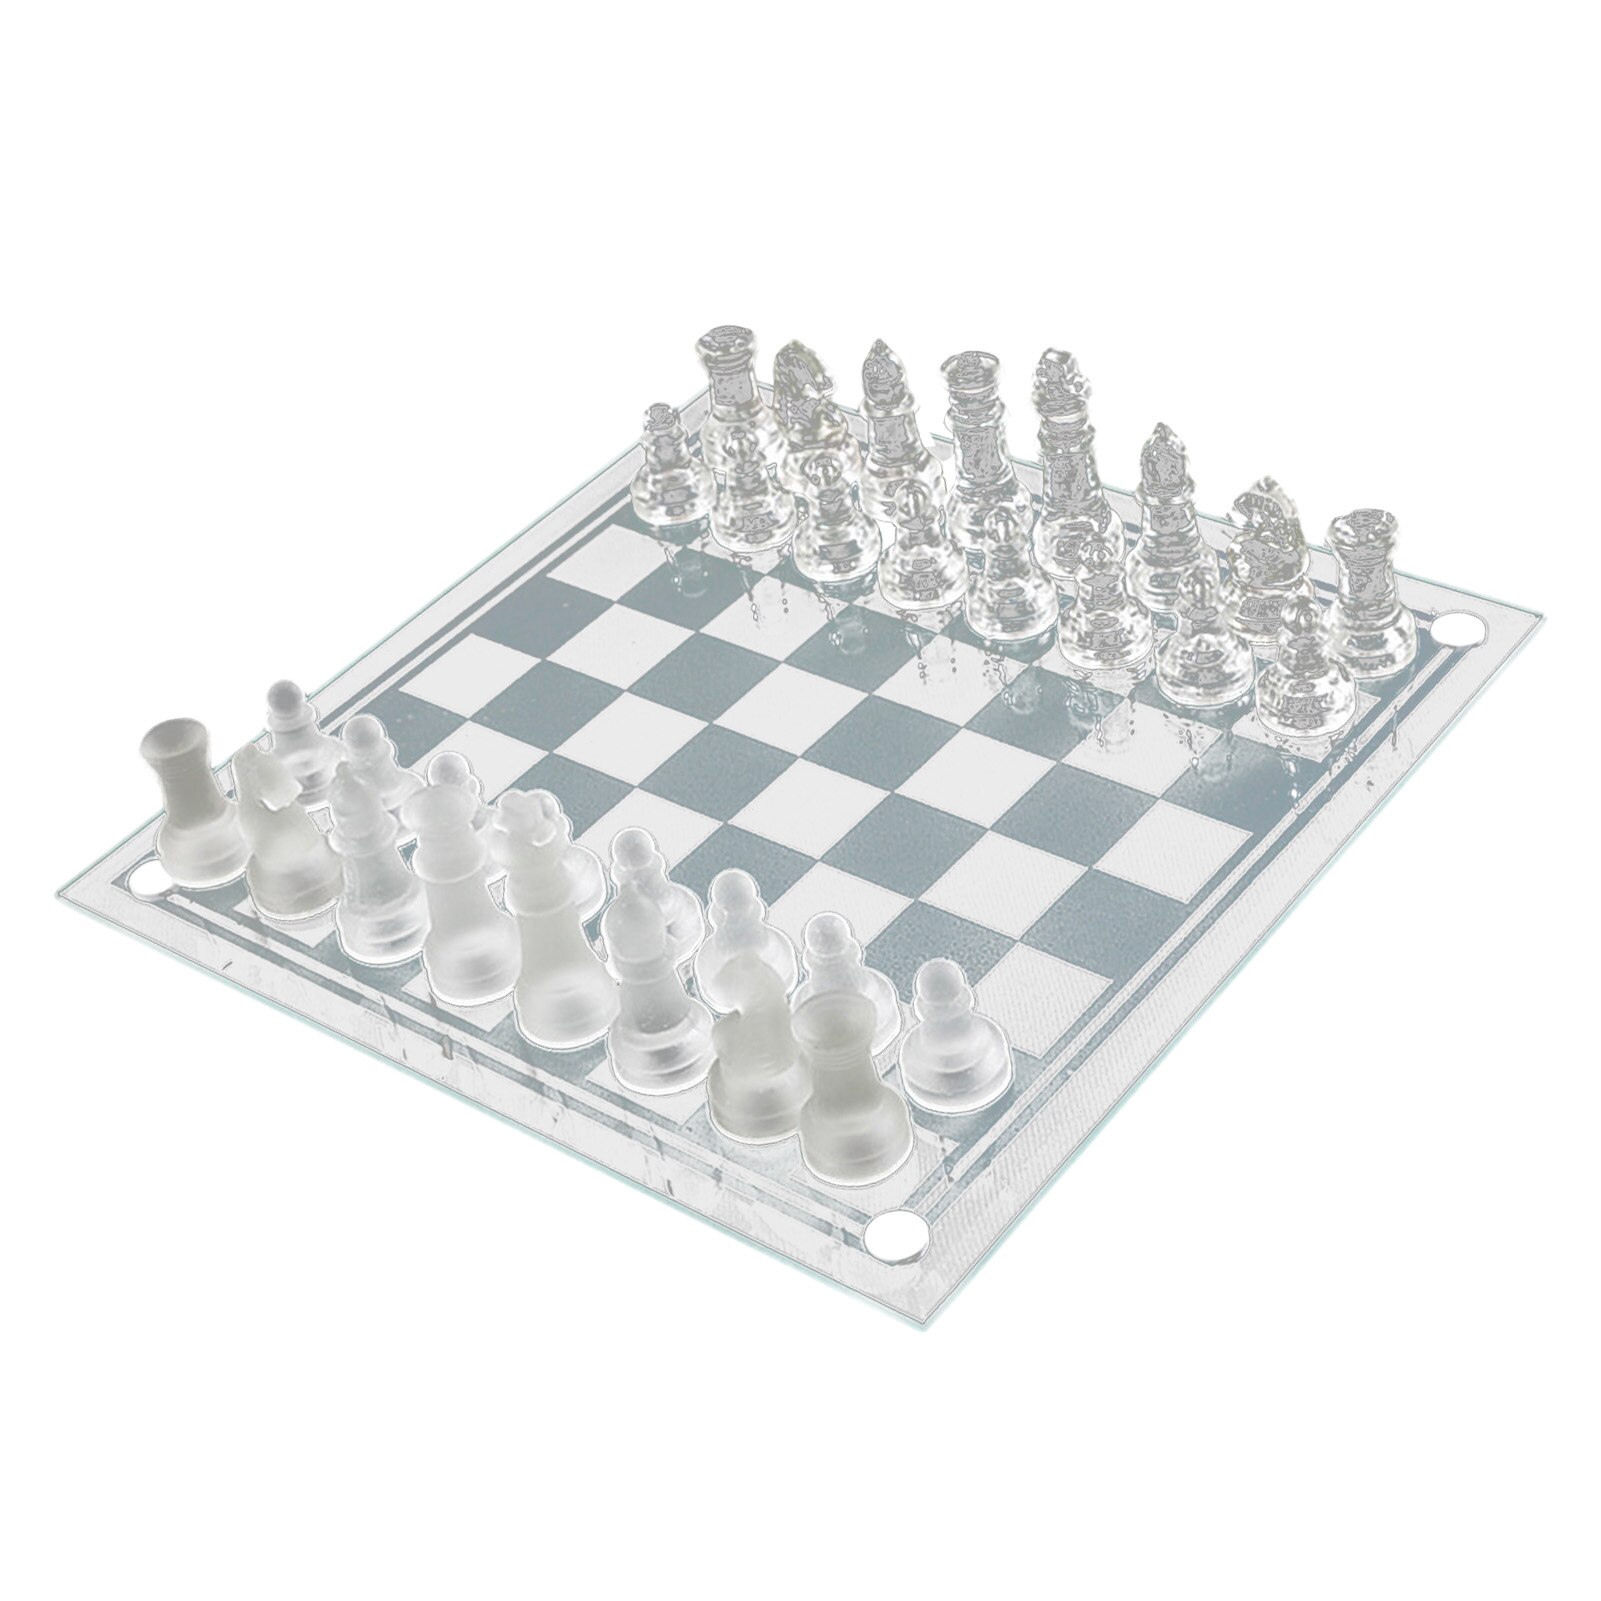 Glass Chess Game Uses High Chess Chess Board Childrens Party Entertainment Game Pieces: 20x20cm